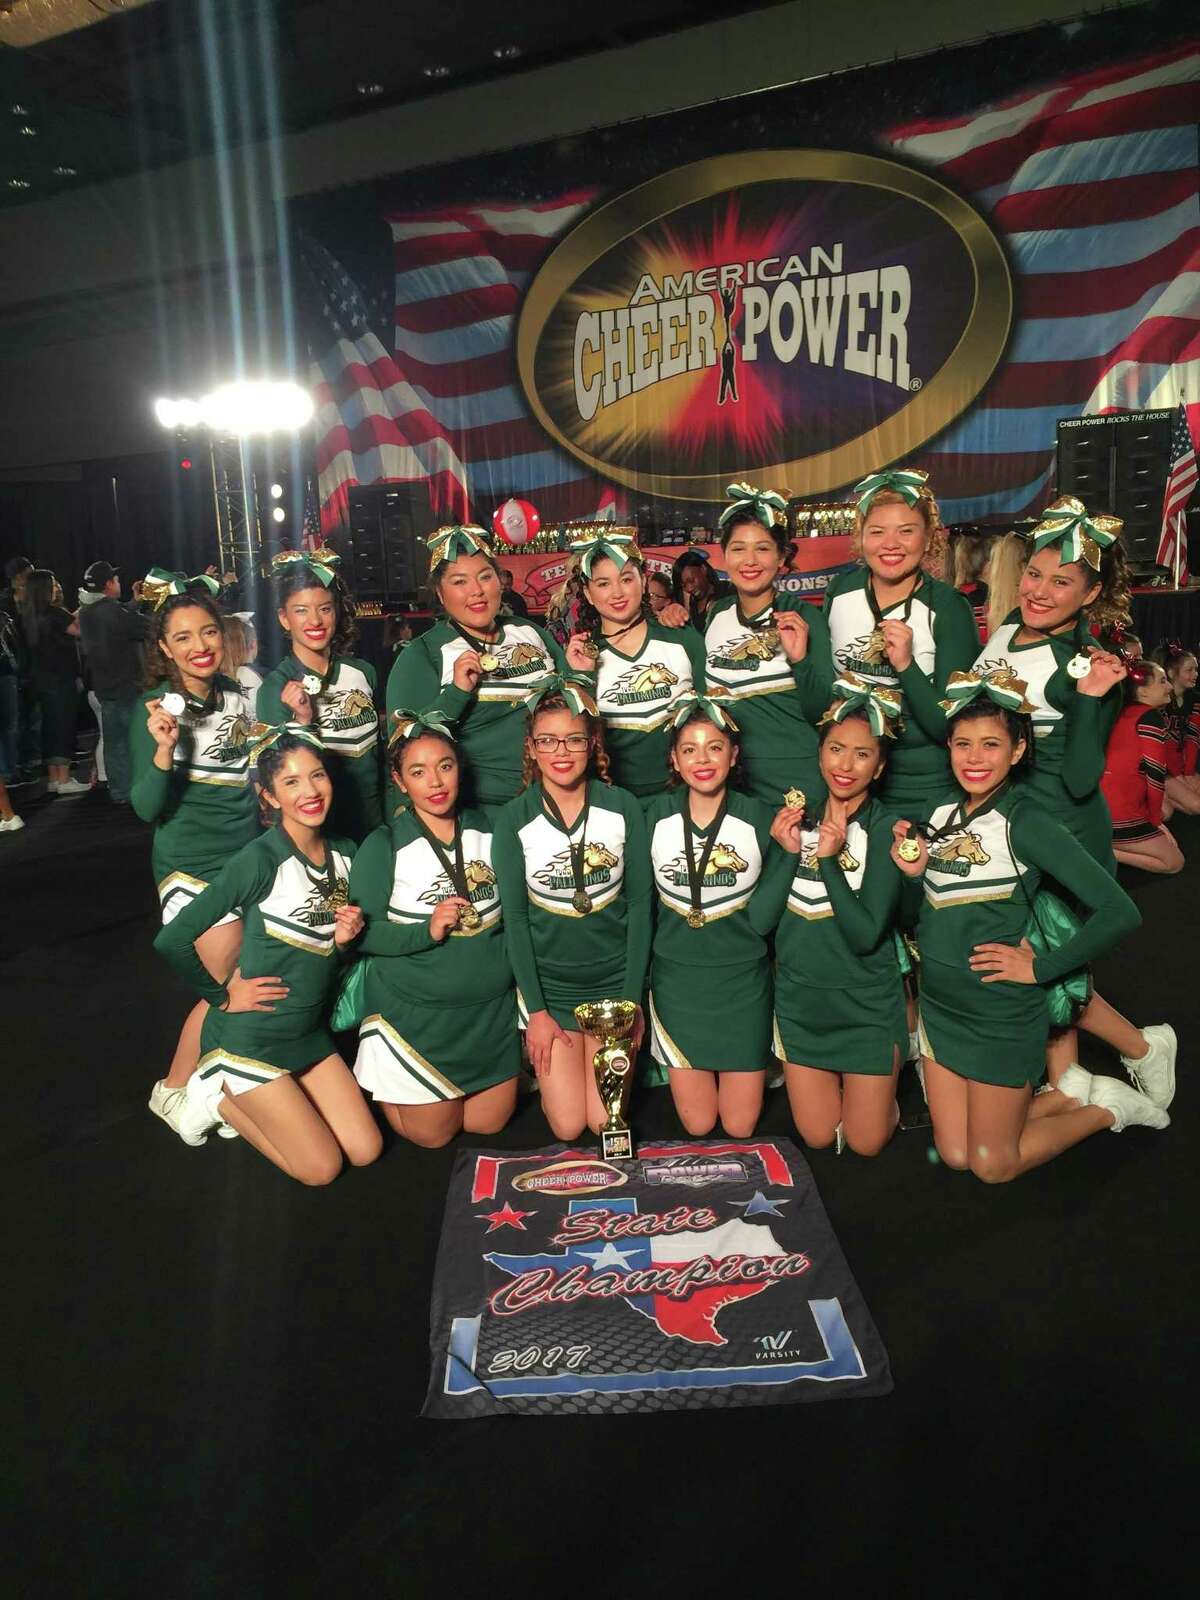 The LCC Palominos’ Pride Team won first place at the first-ever cheer competition during the American Cheer Power Texas State Championship.